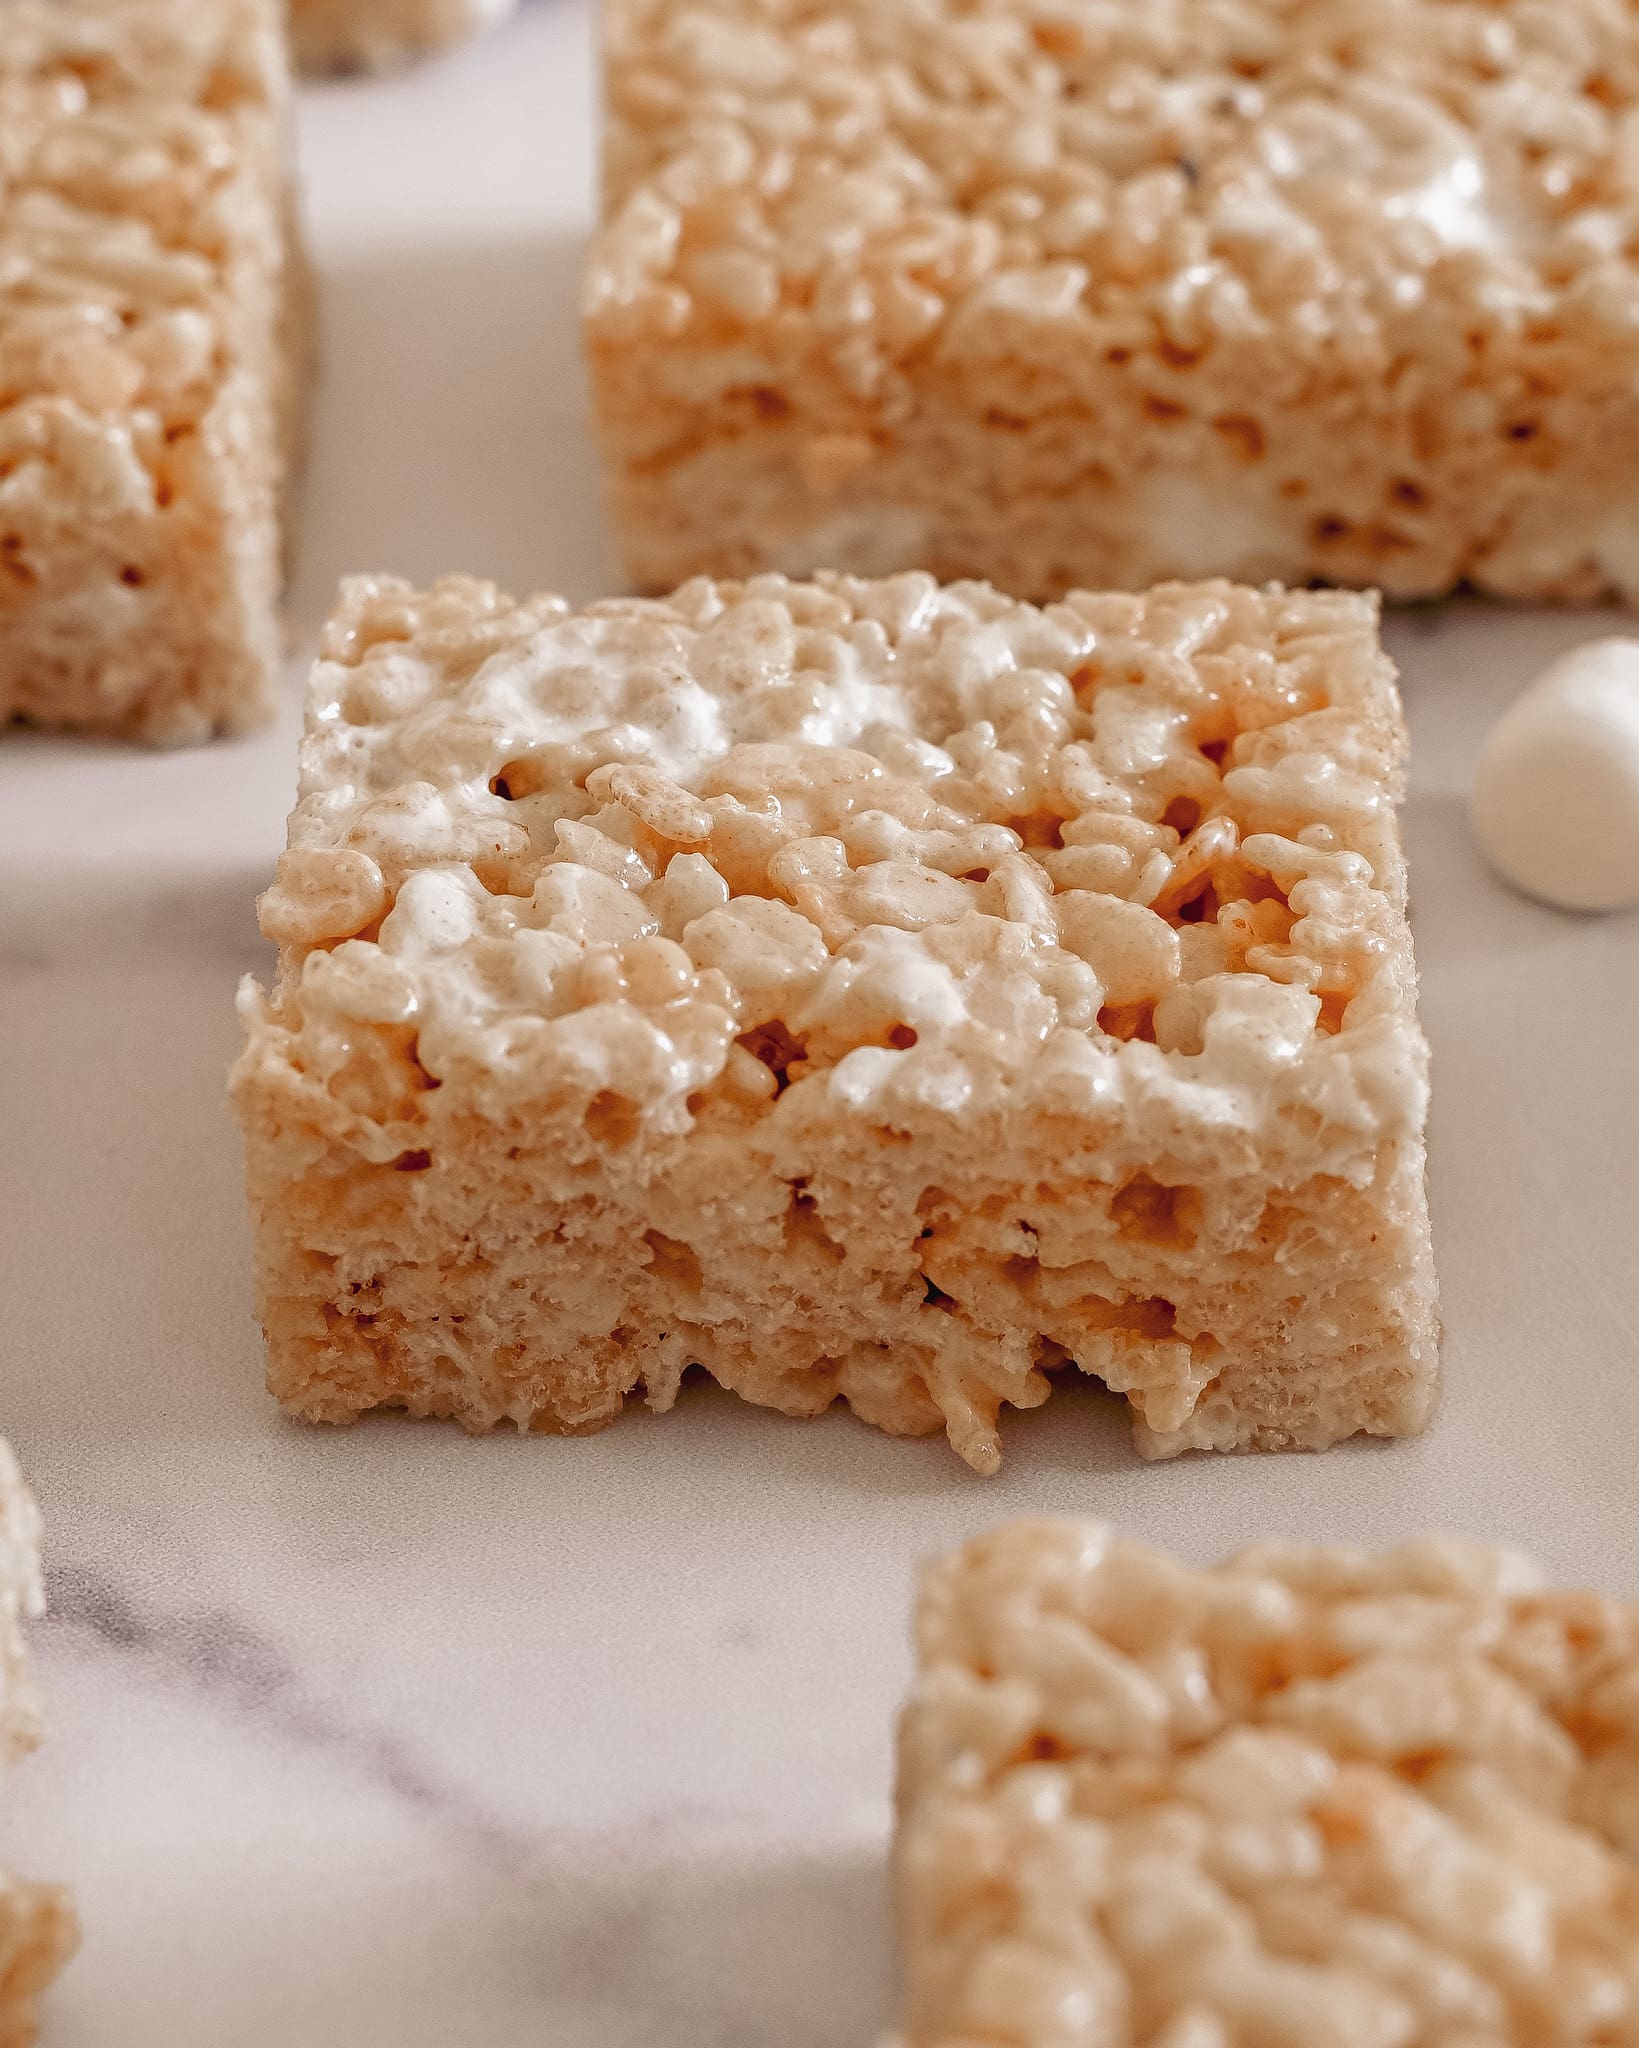 Top view of several rice krispie treats focussed on one center rice krispies treat in the middle on a marble board.